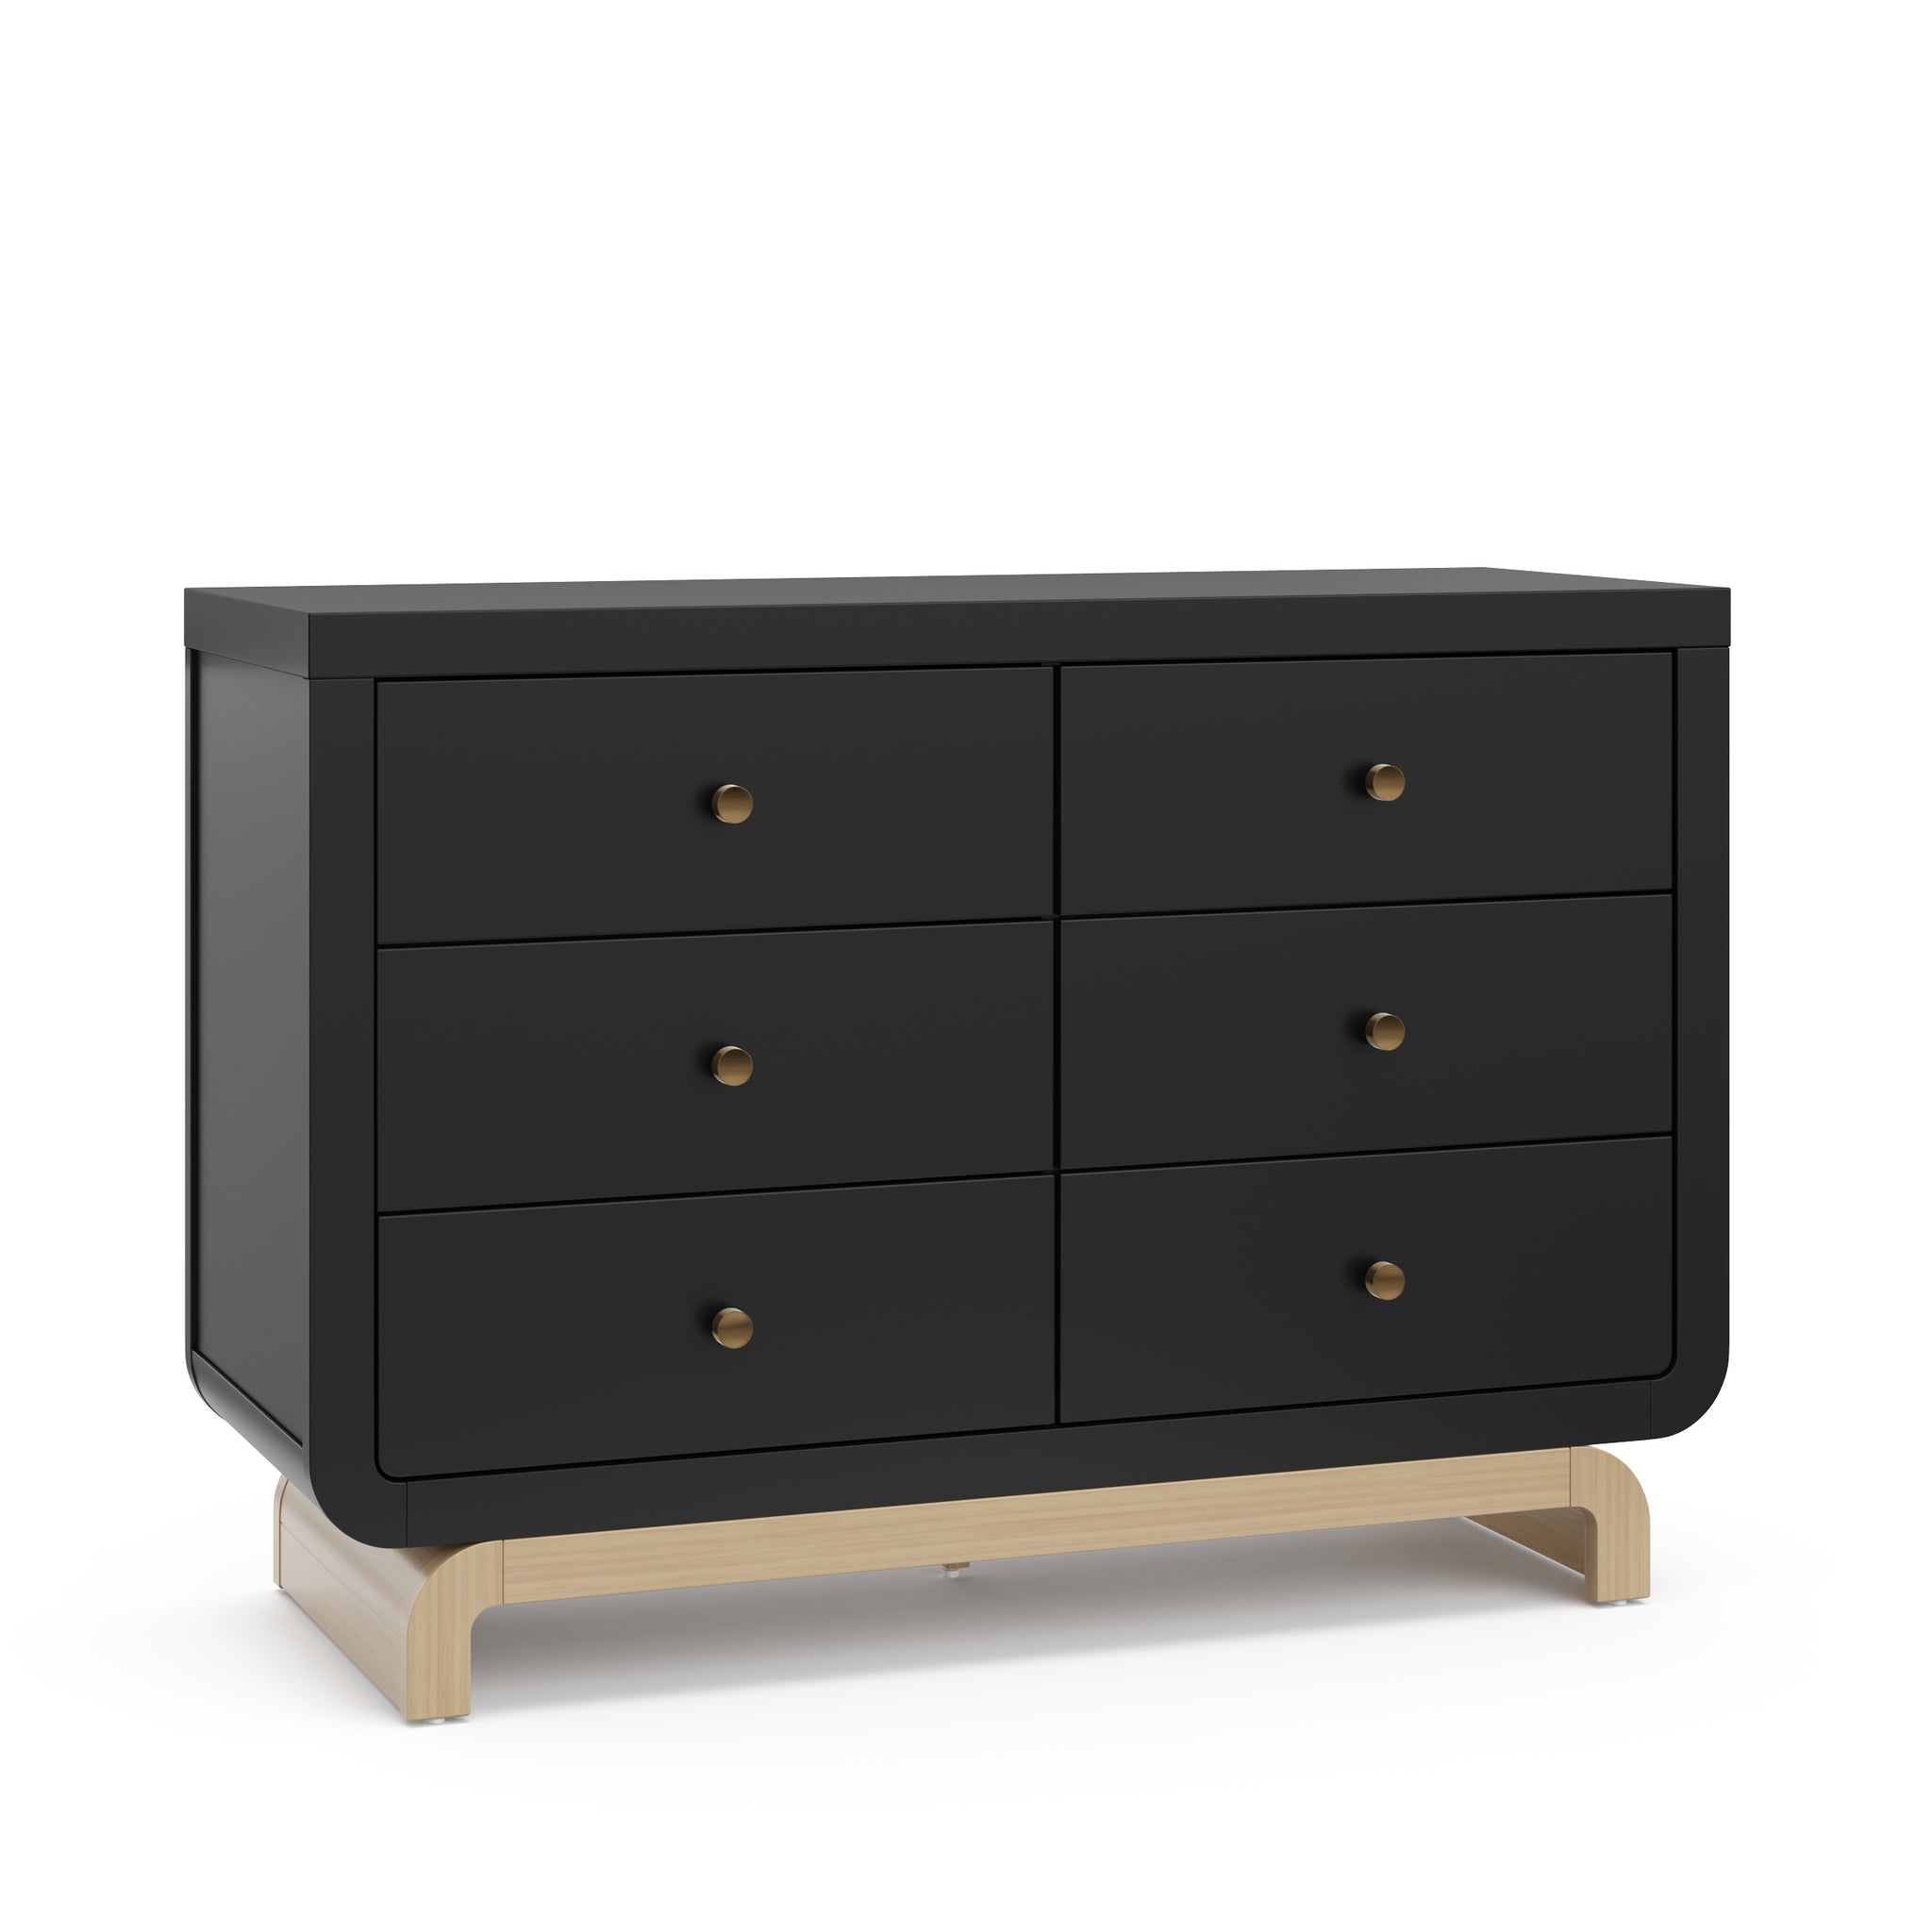 Angled view of black 6 drawer dresser with driftwood base